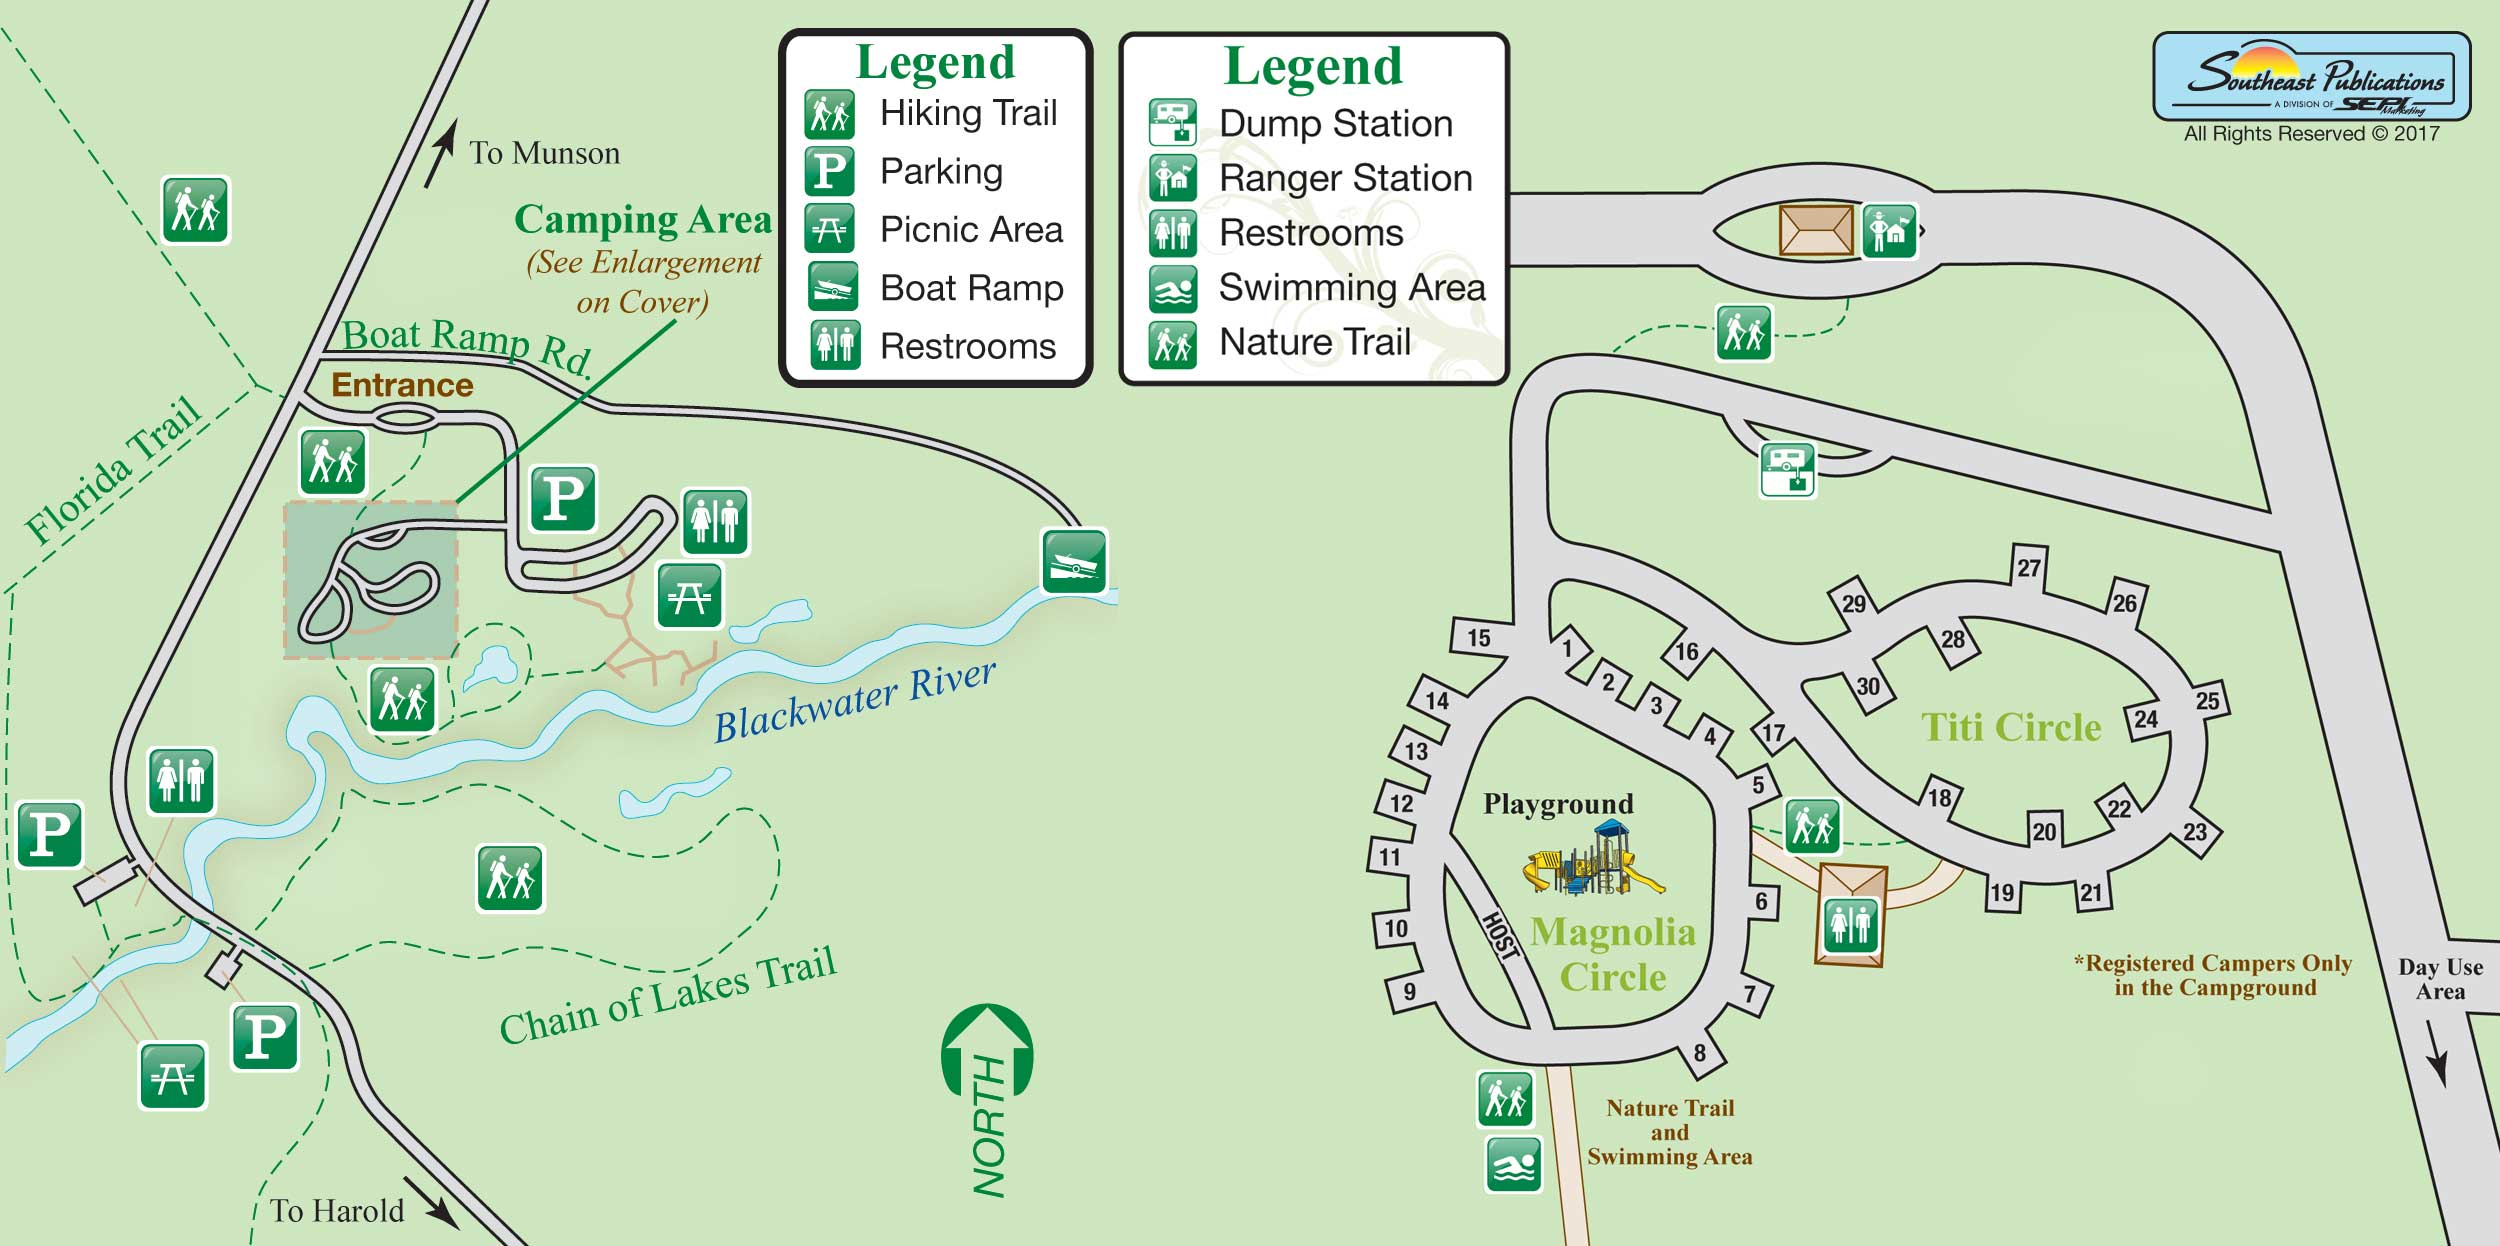 Florida State Parks Rv Camping - Know Your Campground - Florida State Rv Parks Map